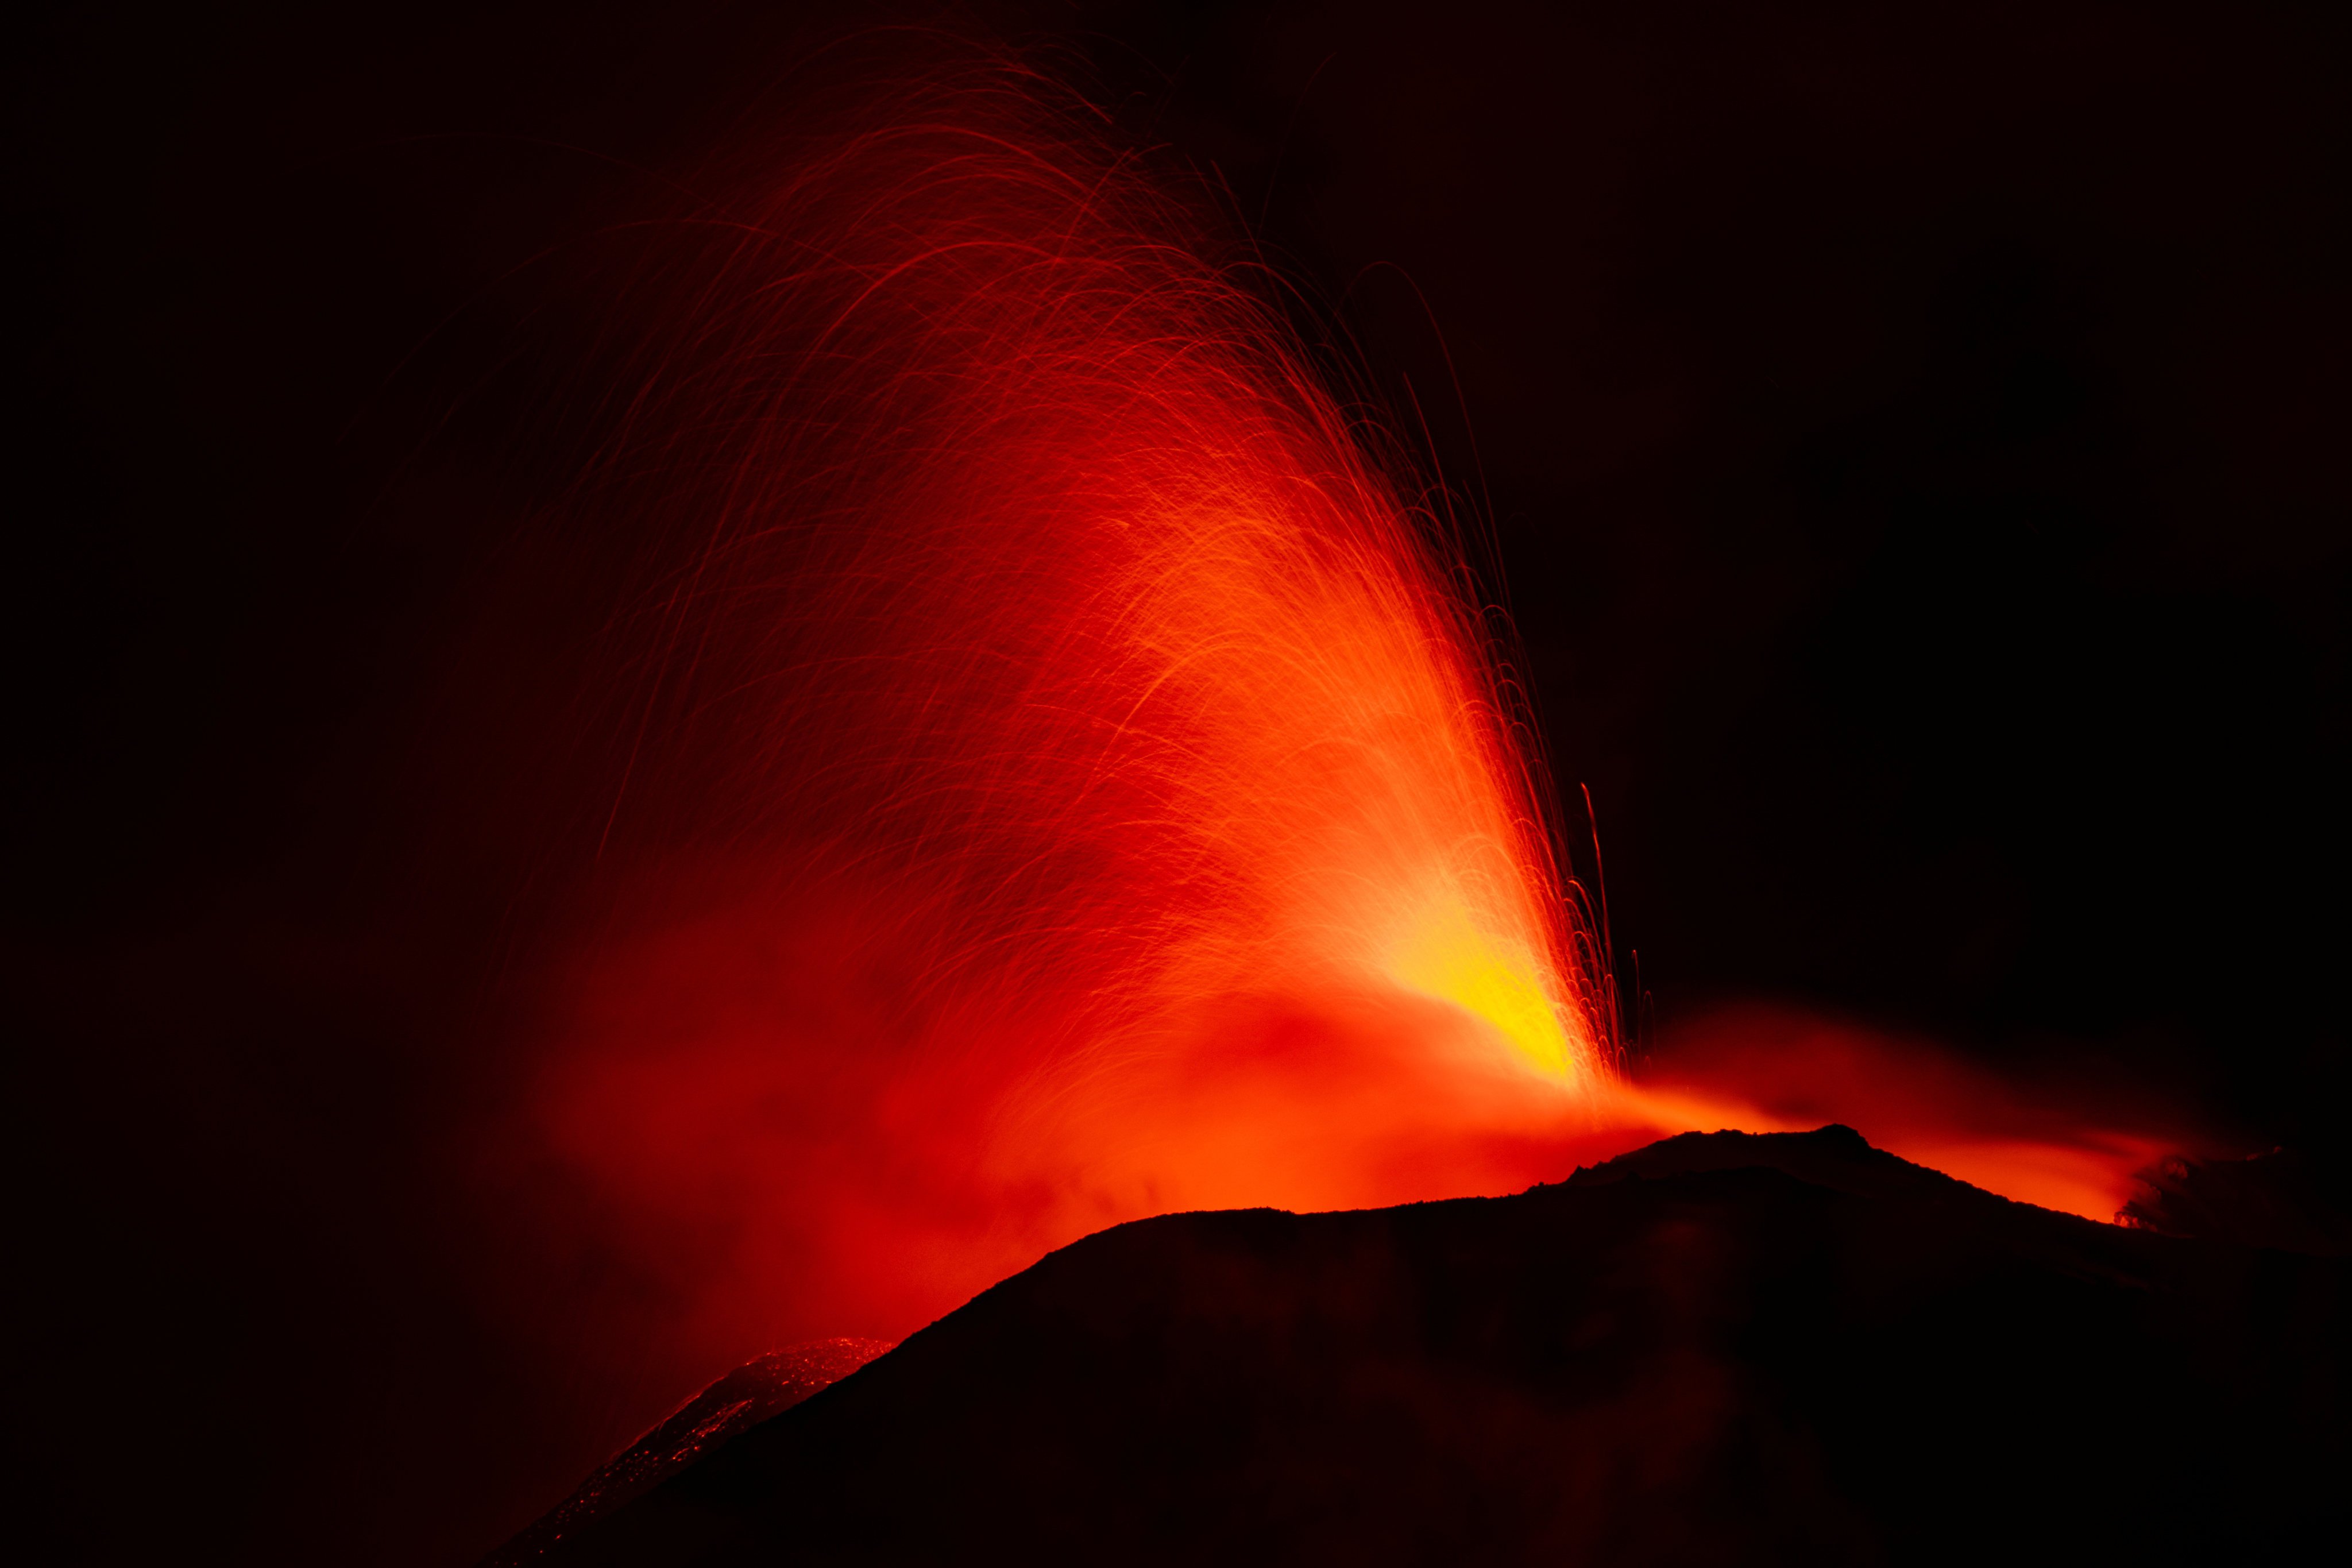 Mount Etna, Europe’s most active volcano, lights up the night sky with eruptions as seen from Rocca Della Valle, Italy on Monday. Photo: Etna Walk / Marco Restivo / Handout via Reuters